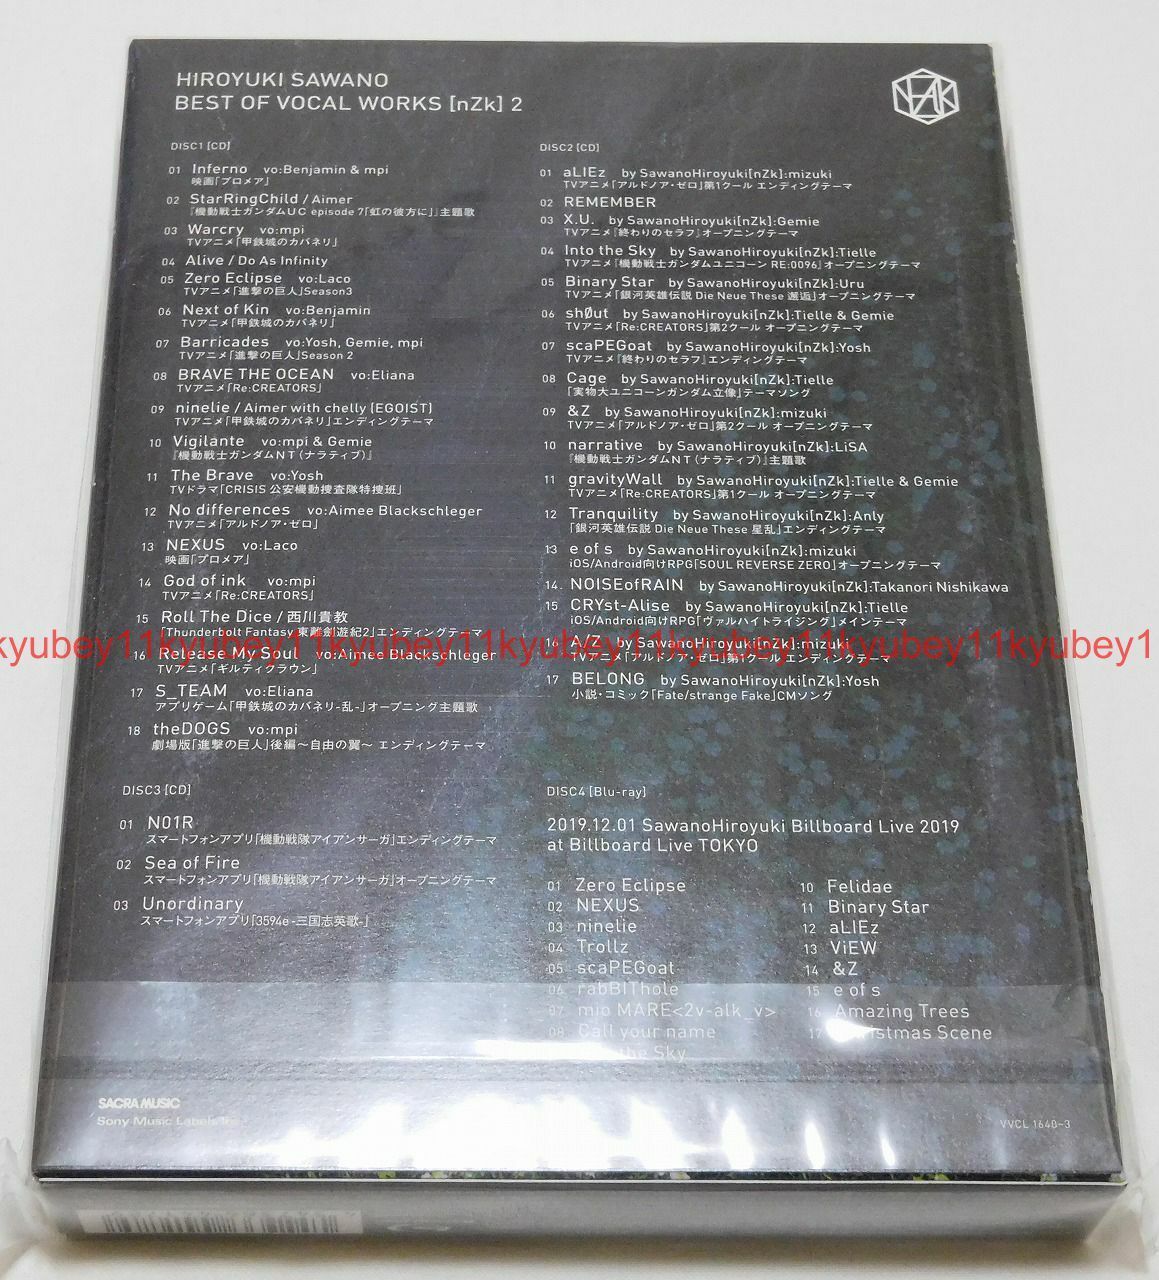 Hiroyuki Sawano Best Of Vocal Works Nzk 2 First Limited Edition 3 Cd Blu Ray Ebay